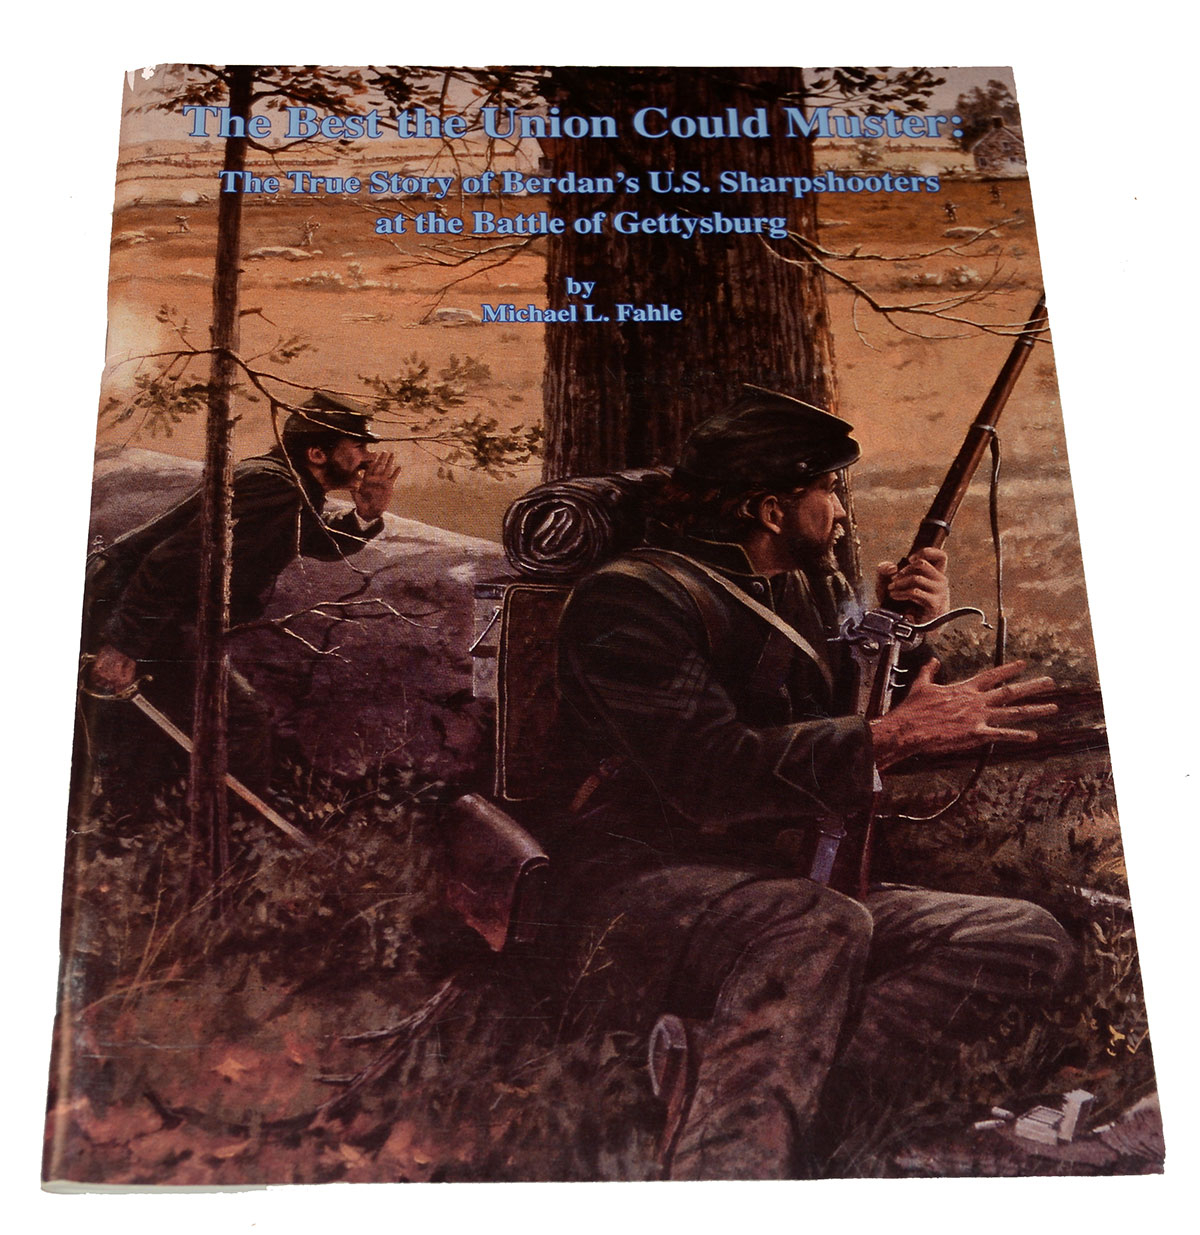 1988 COPY OF A BOOK COVERING BERDAN’S SHARPSHOOTERS AT GETTYSBURG